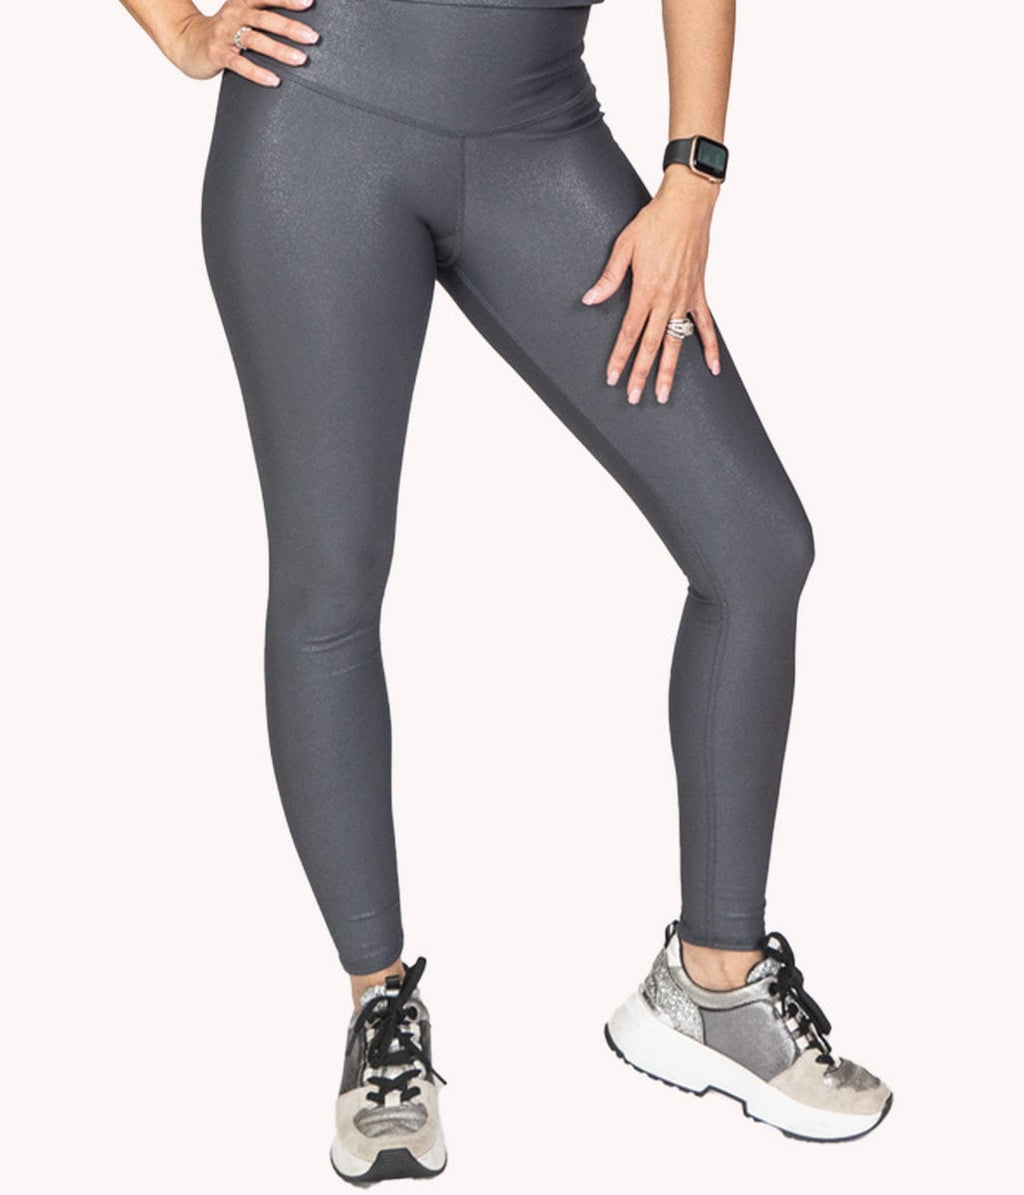 Bottoms - Shop Leggings To Fit Your Style – NoorFit